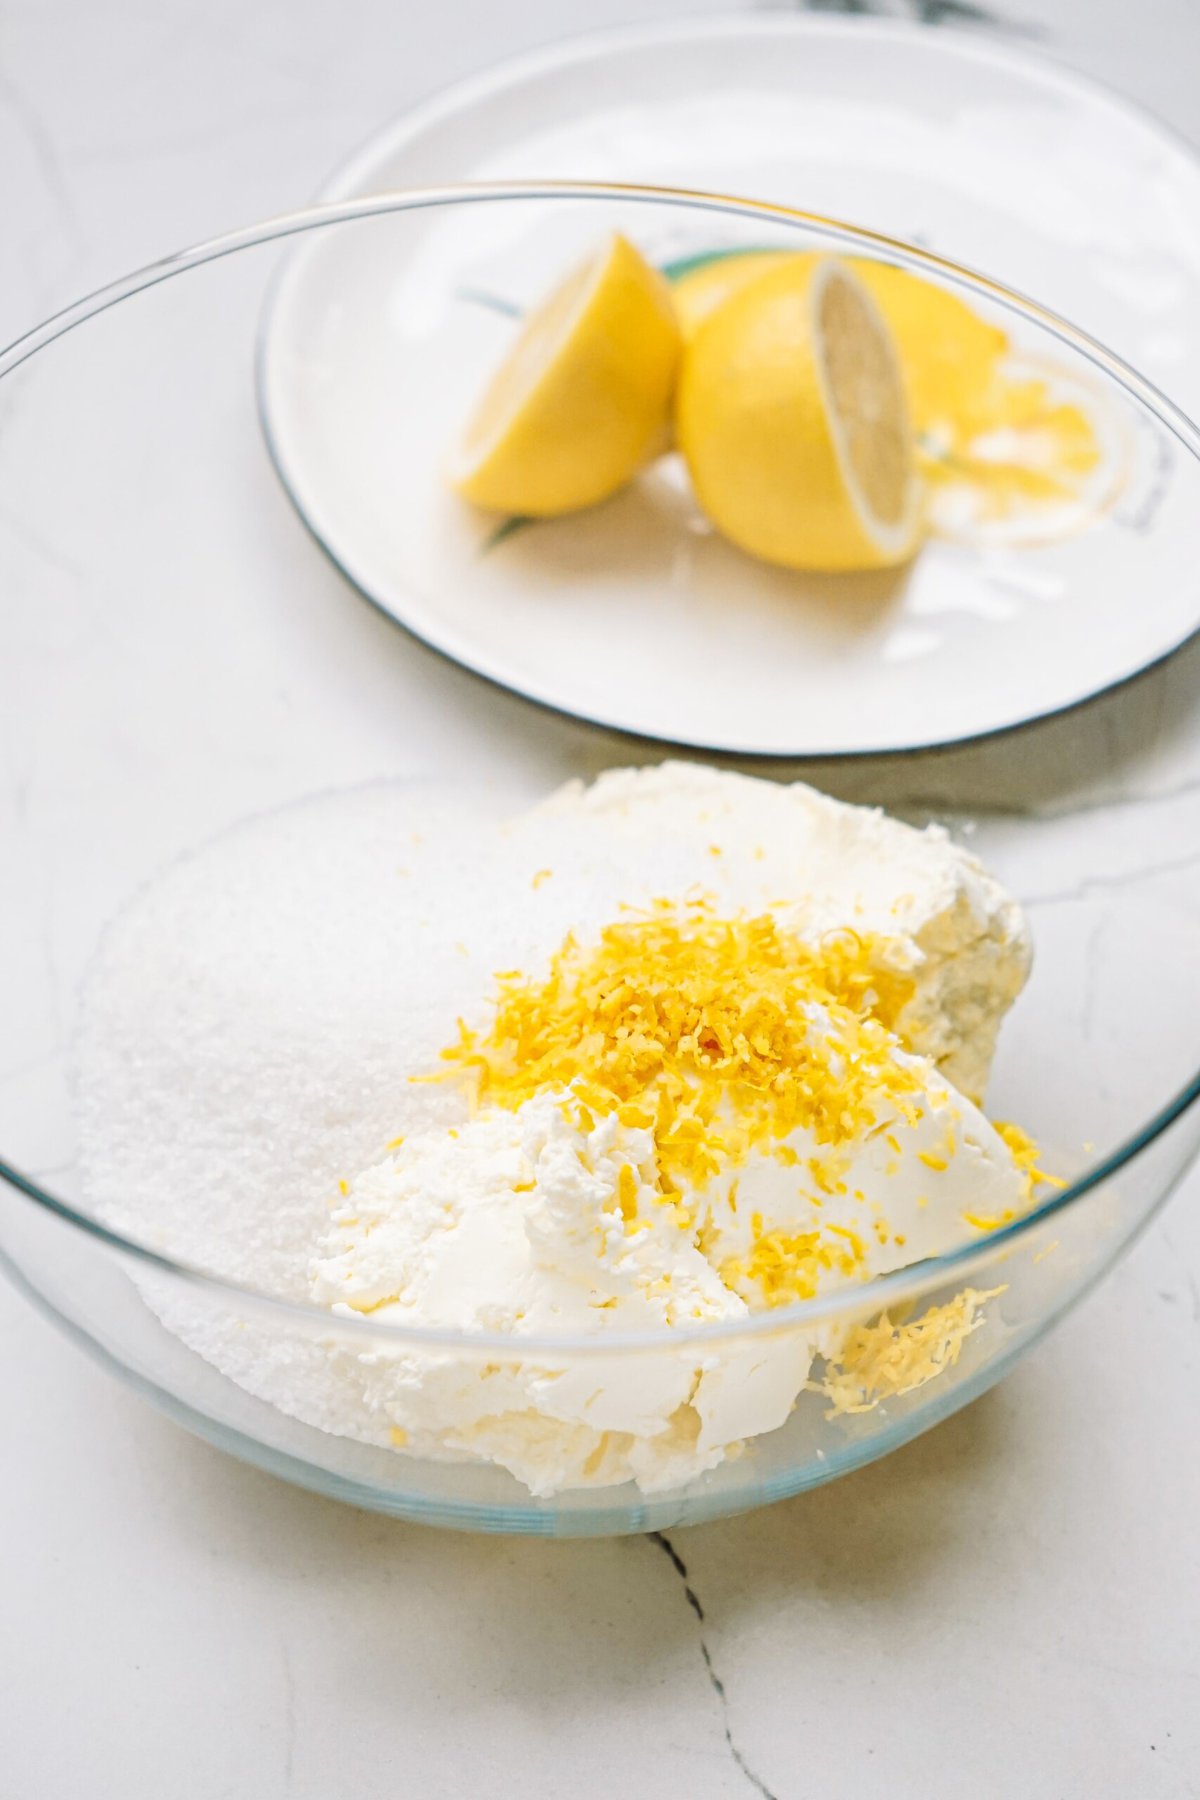 Bowl of ingredients including sugar, cream, and lemon zest, with lemon wedges on a plate in the background.